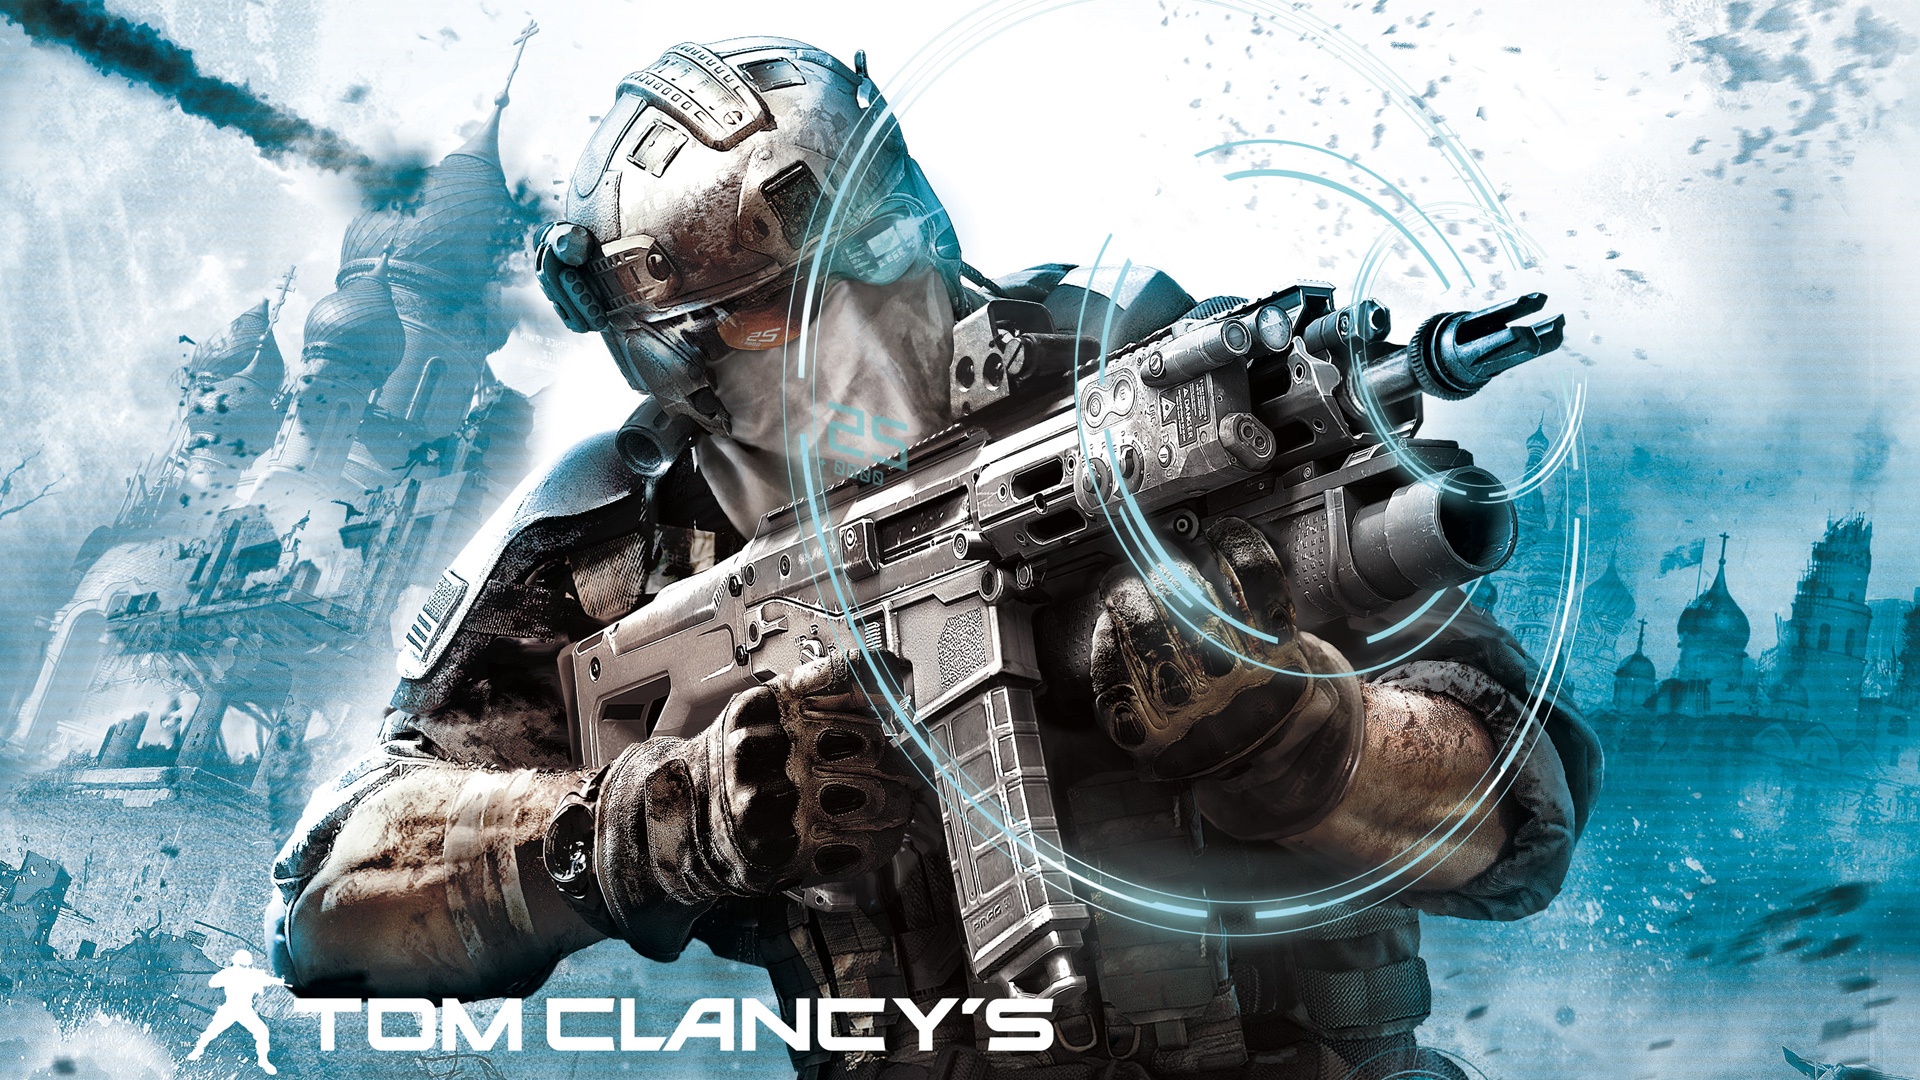 ghost recon future soldier wallpaper,action adventure game,shooter game,pc game,games,movie